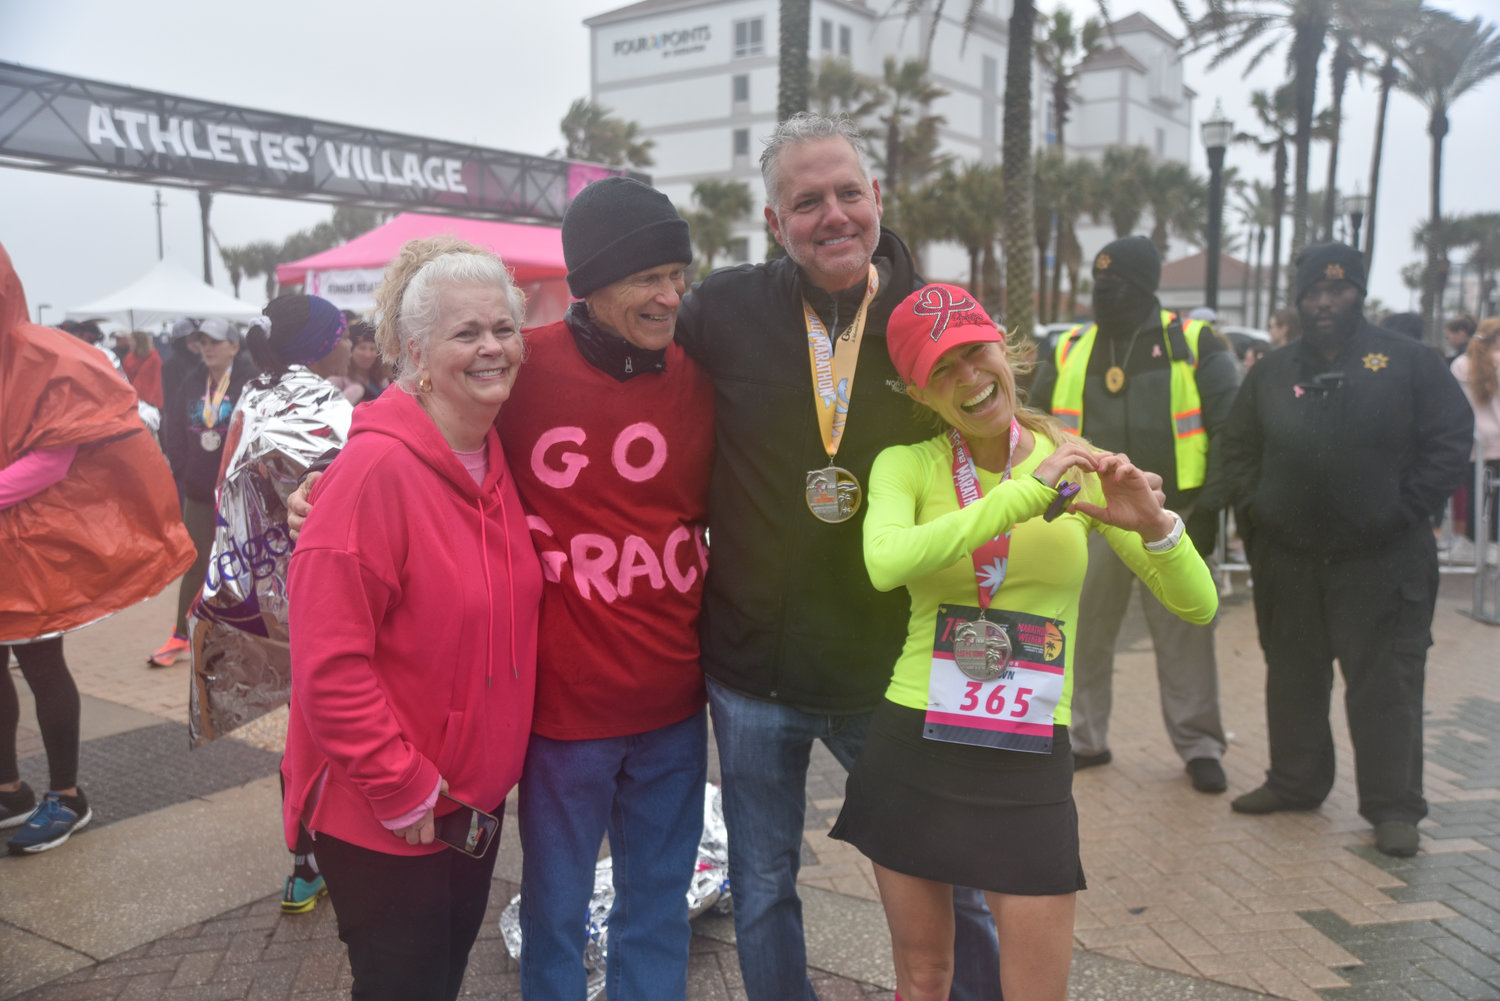 The 15th DONNA Marathon Weekend brought out more than 4,000 runners on Feb. 4-6.